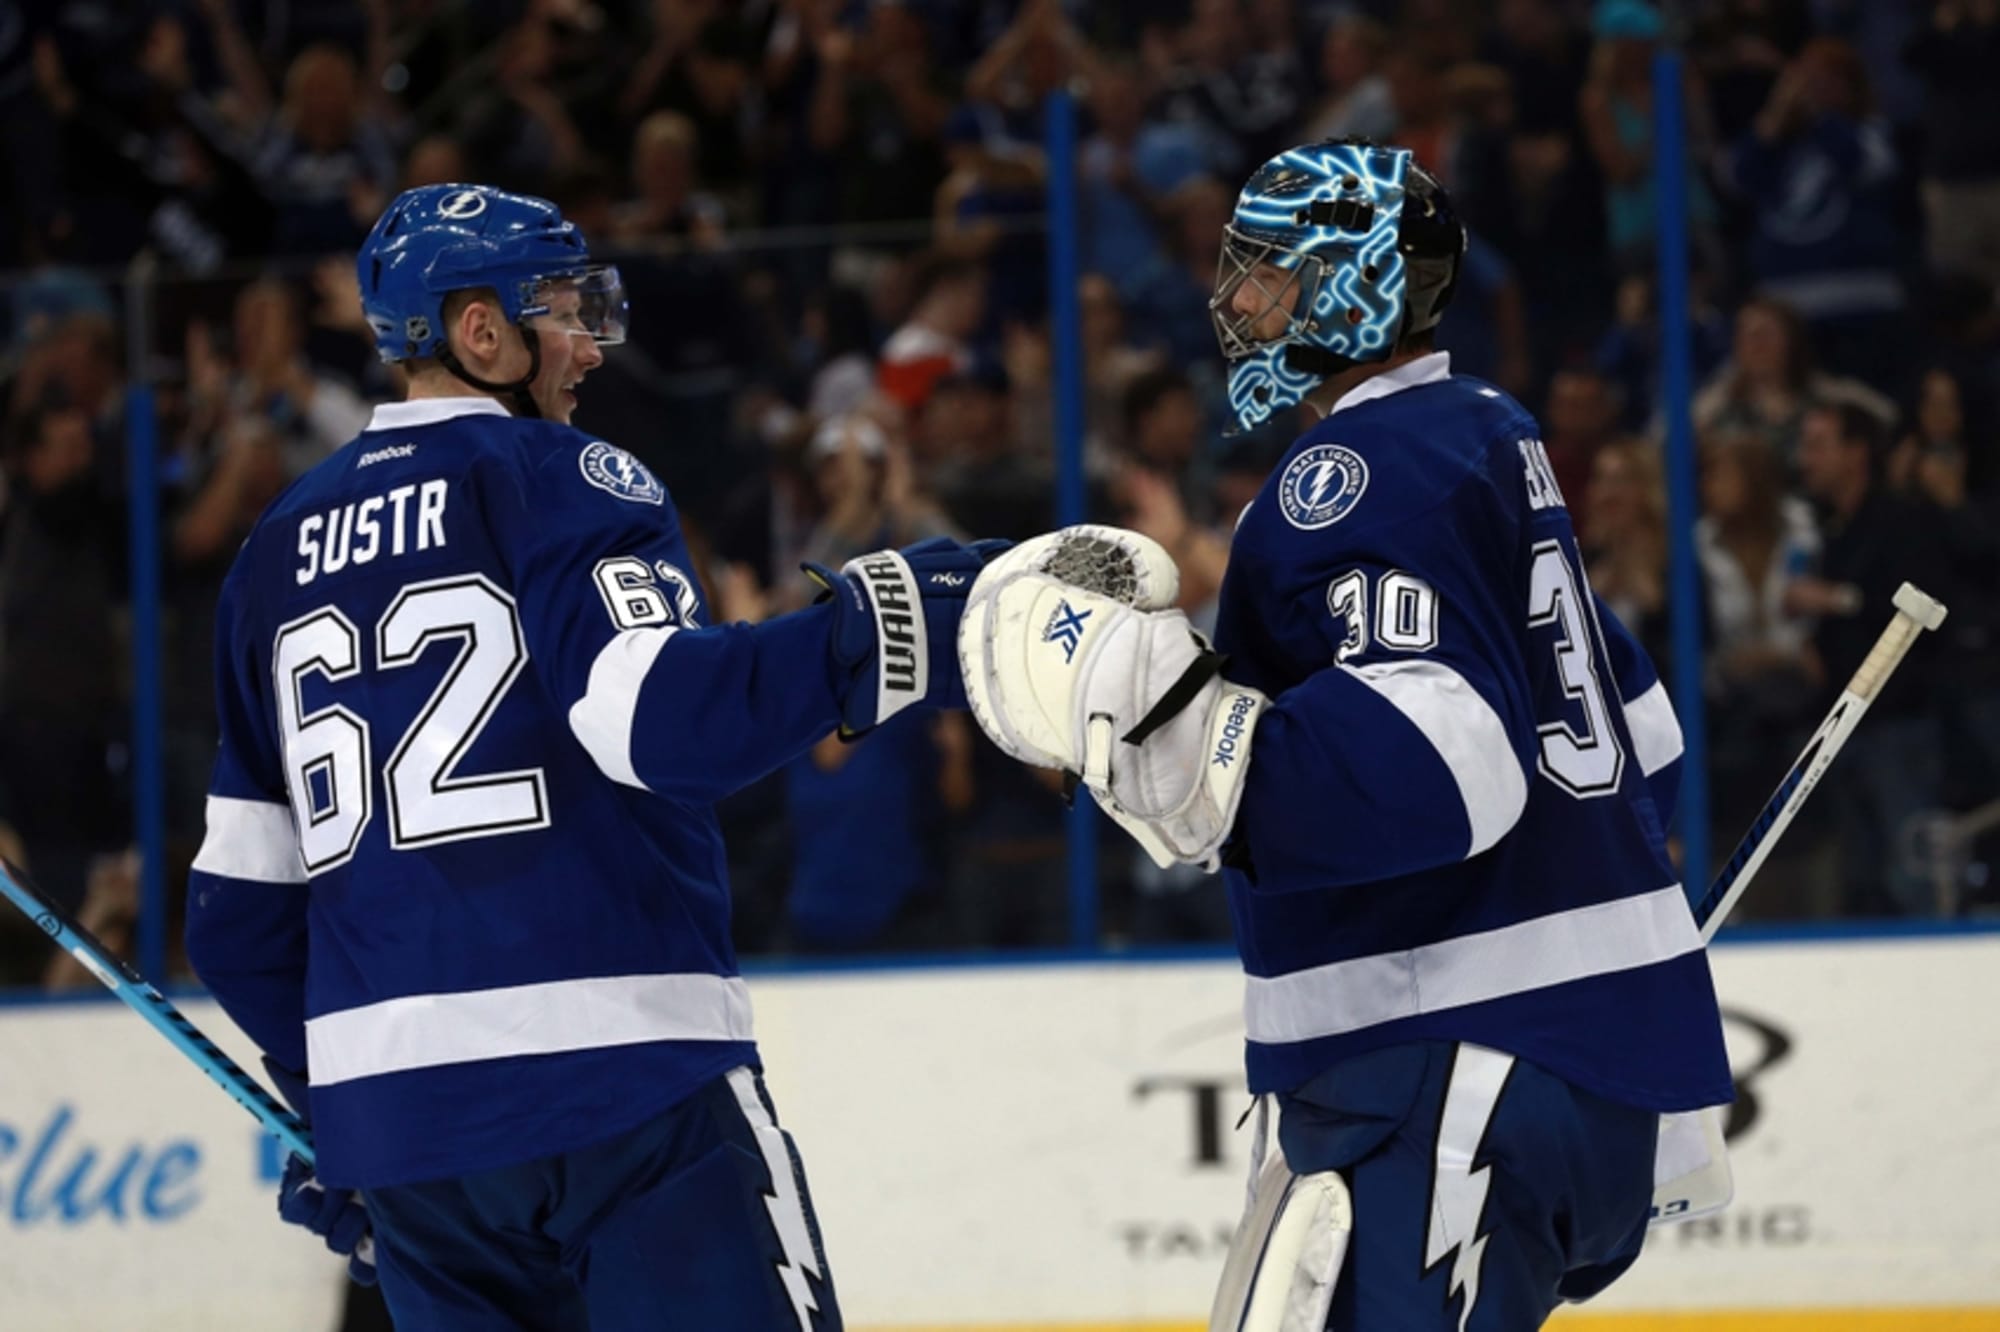 Tampa Bay Lightning: Should The Bolts Shop Offense Or Defense?